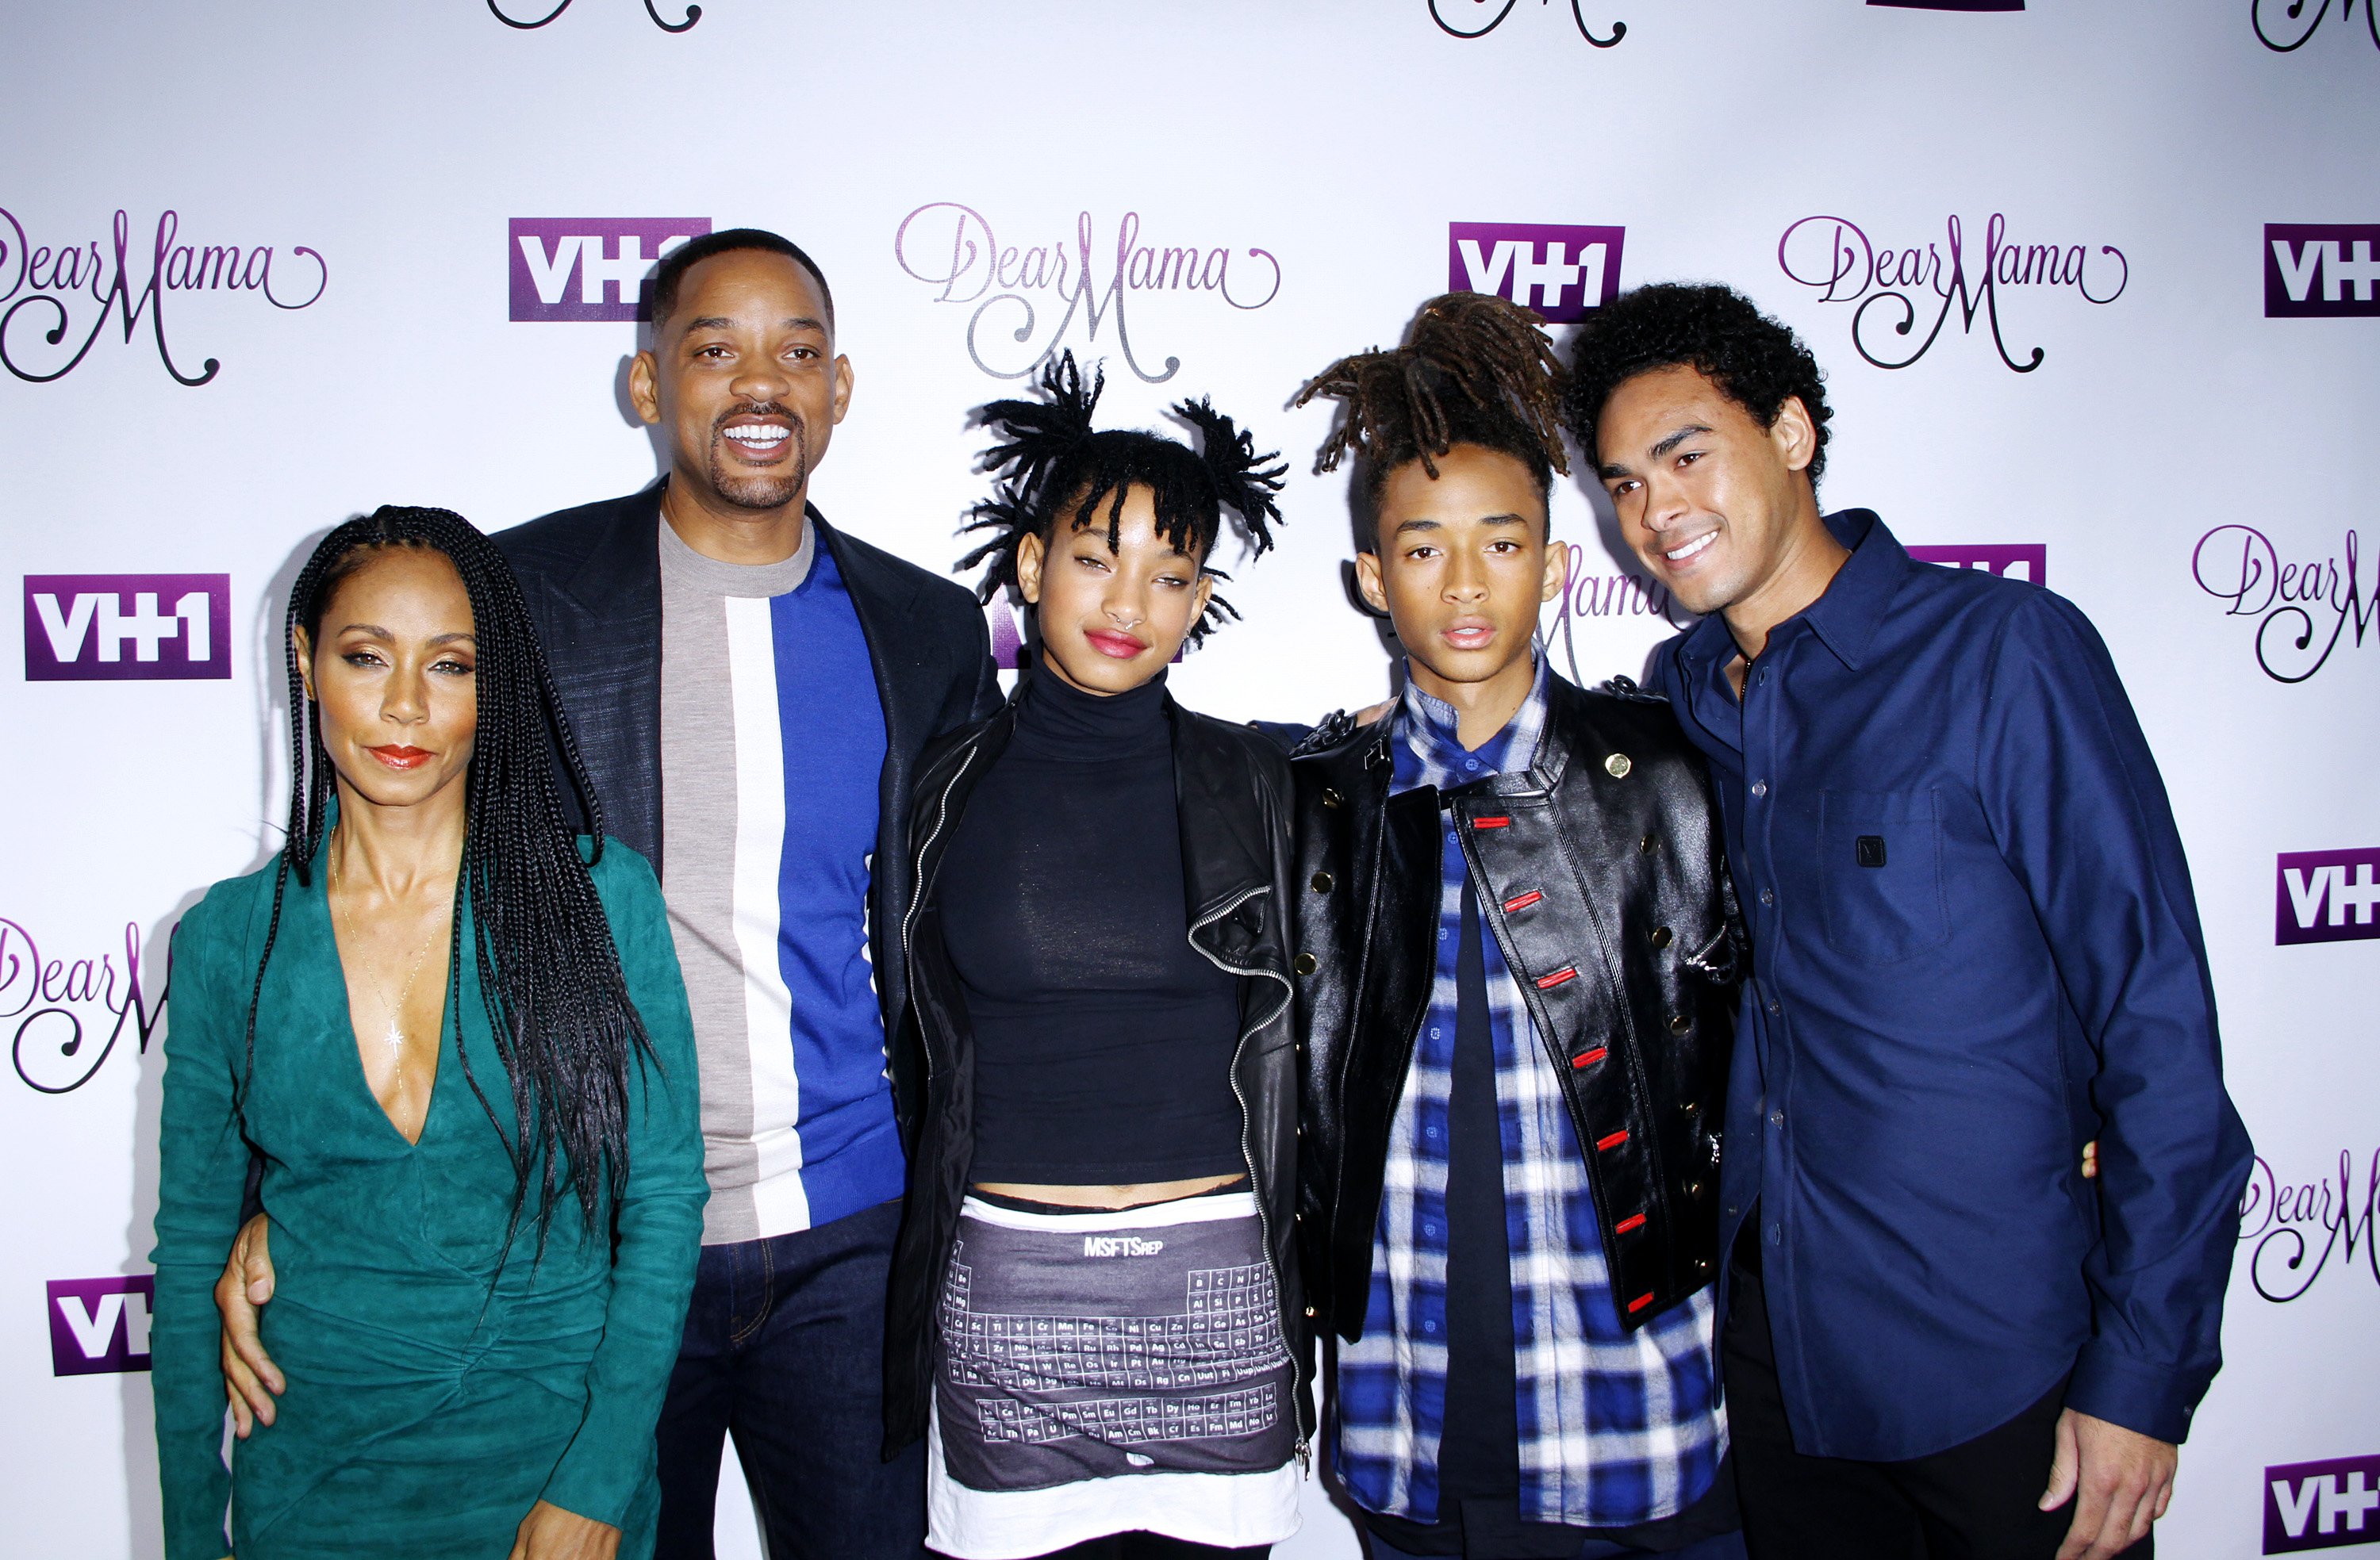 Jada Pinkett Smith, Will Smith, Willow Smith, Jaden Smith and Trey Smith attend the VH1 "Dear Mama" taping at St. Bartholomew's Church on May 3, 2016 in New York City | Source: Getty Images